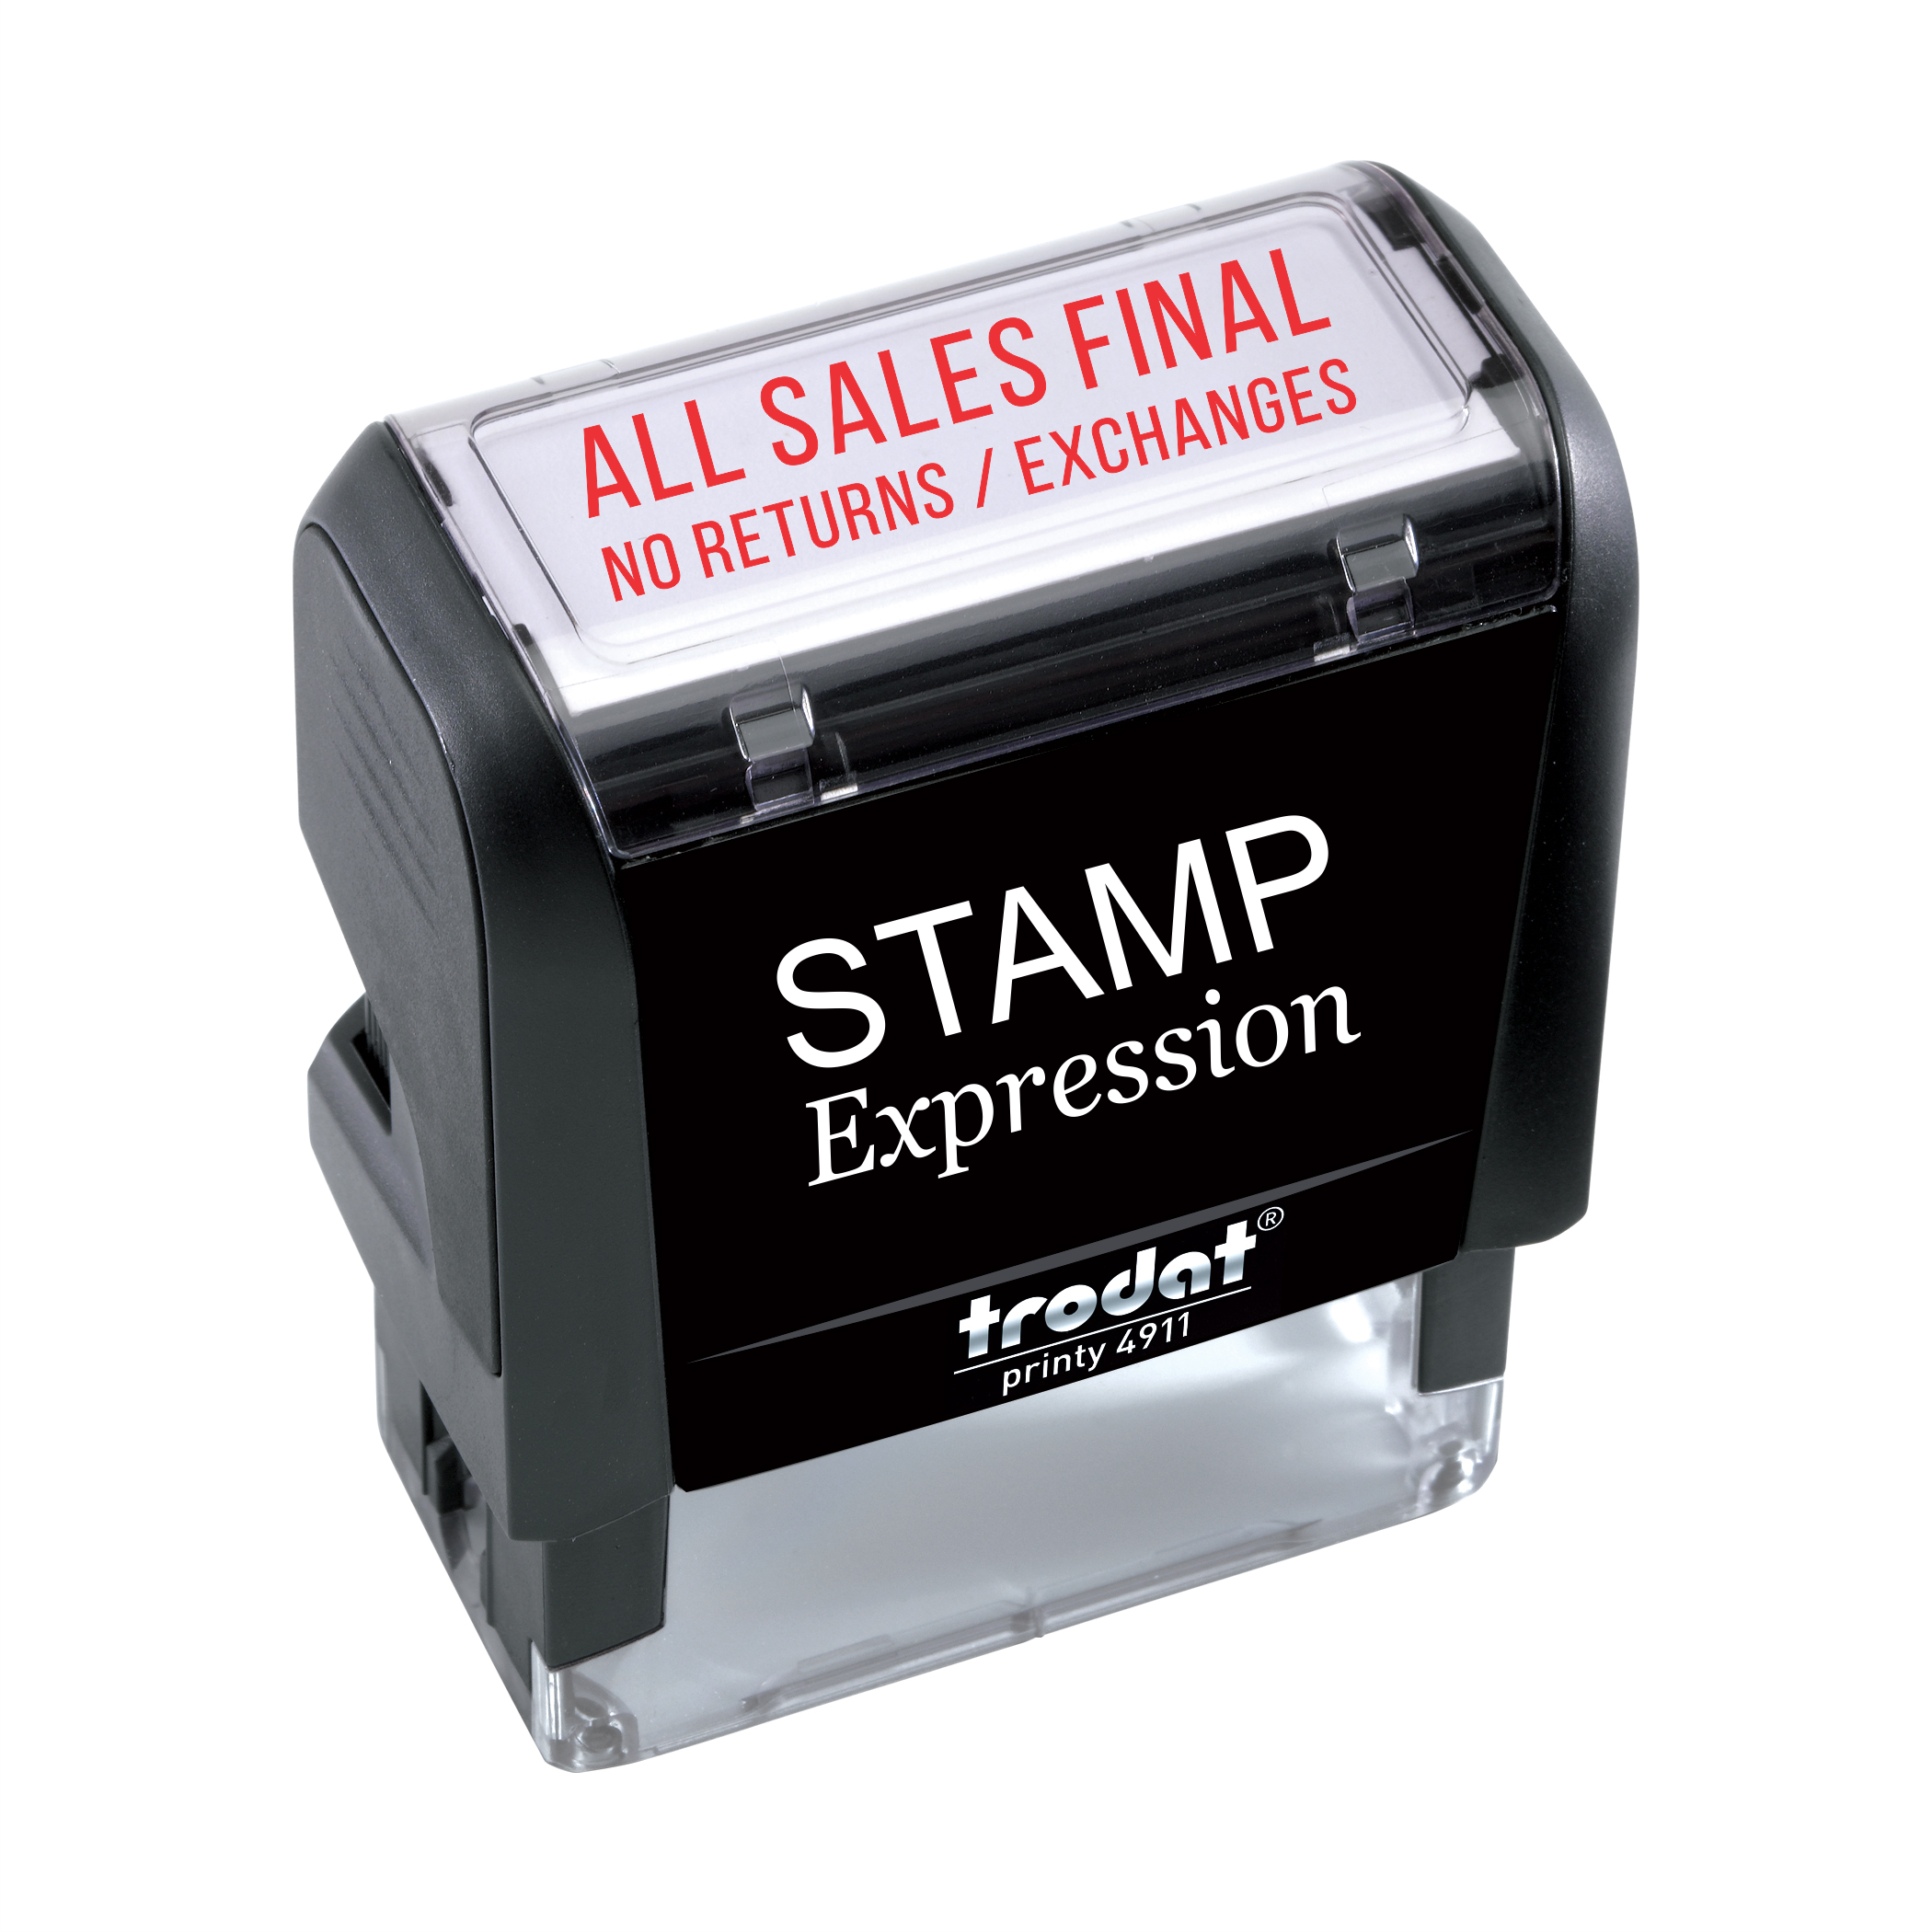 All Sales Final No Returns Exchanges Only Office Self Inking Rubber Stamp